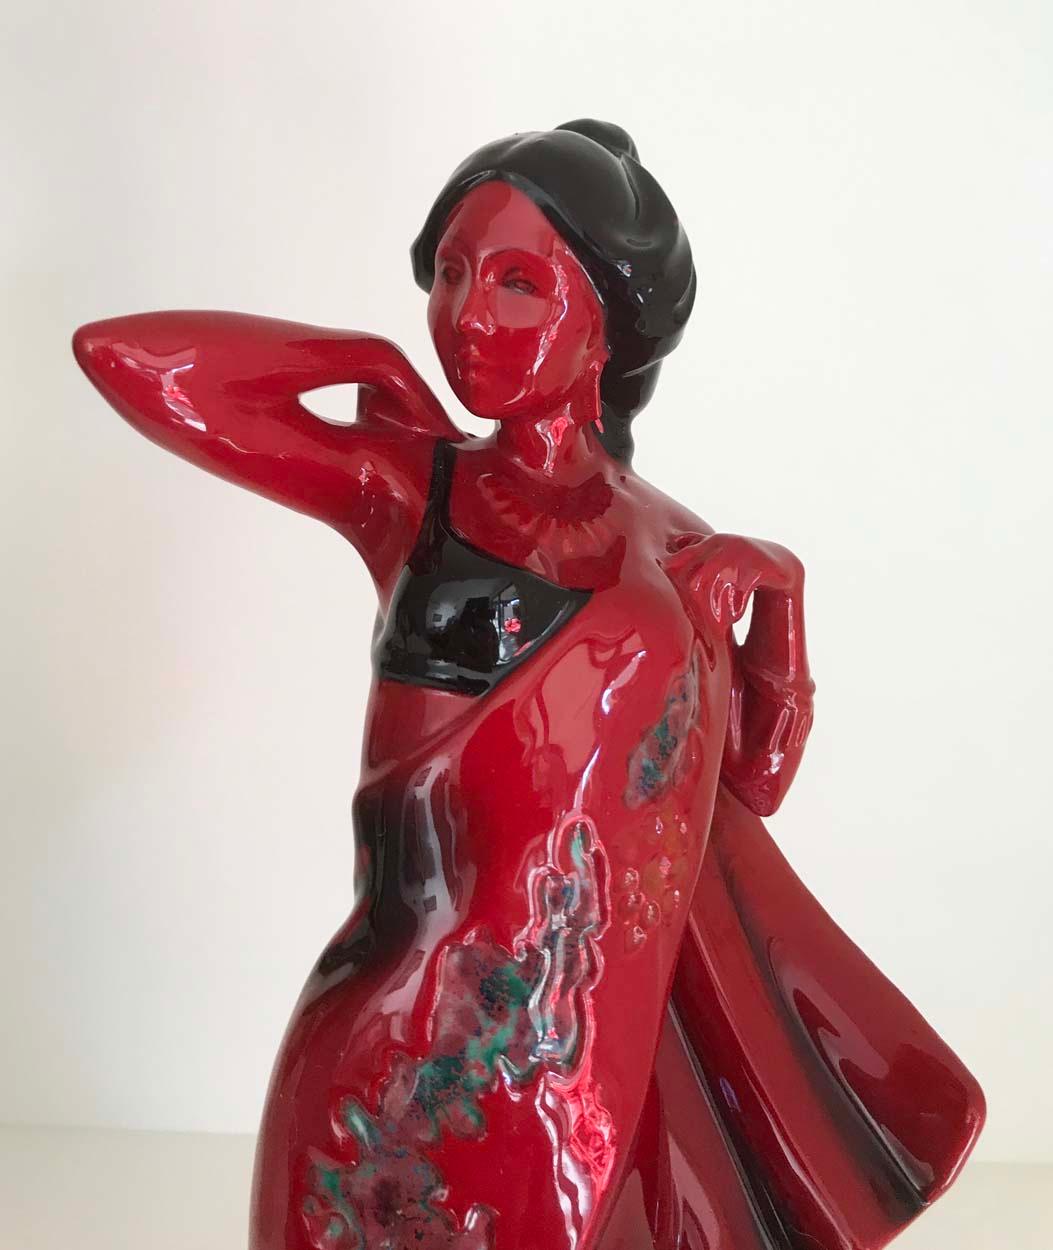 Royal Doulton Flambe Limited Edition Figurine, Eastern Grace, circa 1996 In Excellent Condition For Sale In Melbourne, Victoria